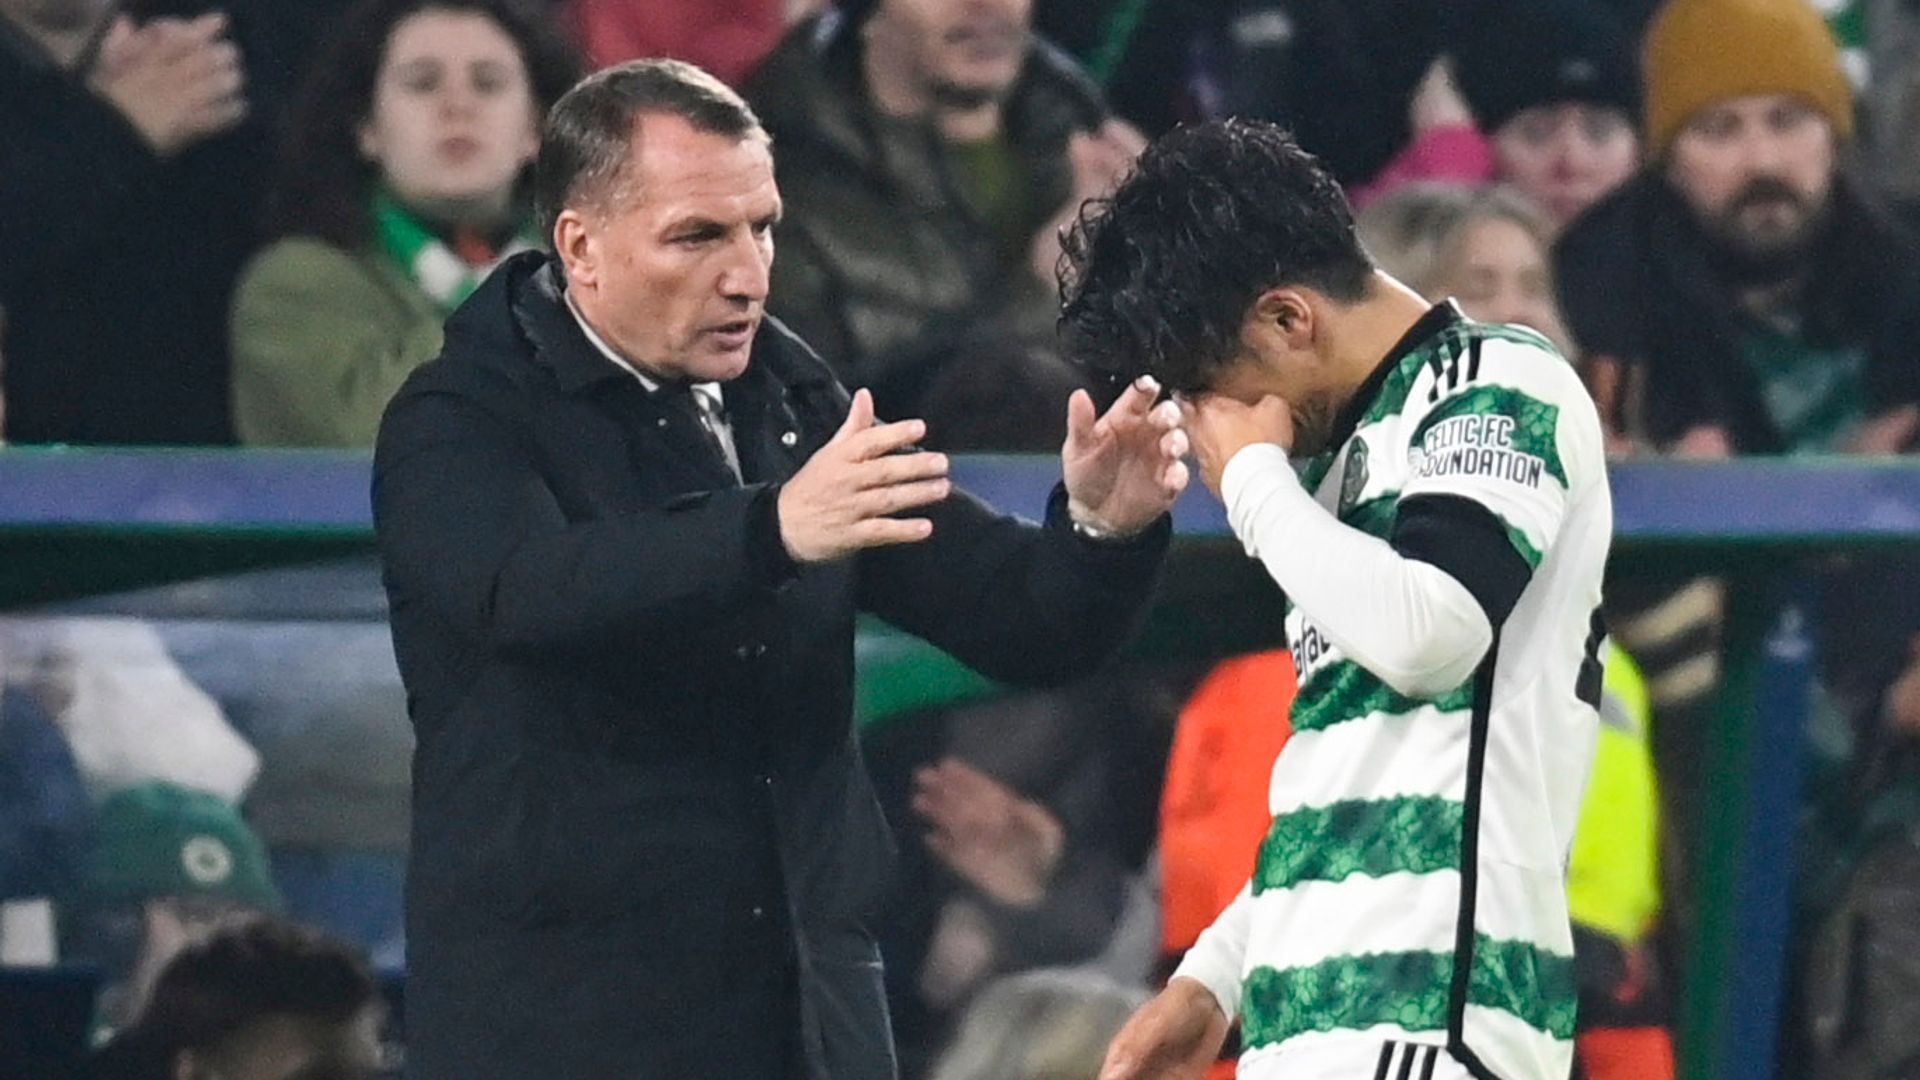 Hatate injury 'a bad one', says Rodgers